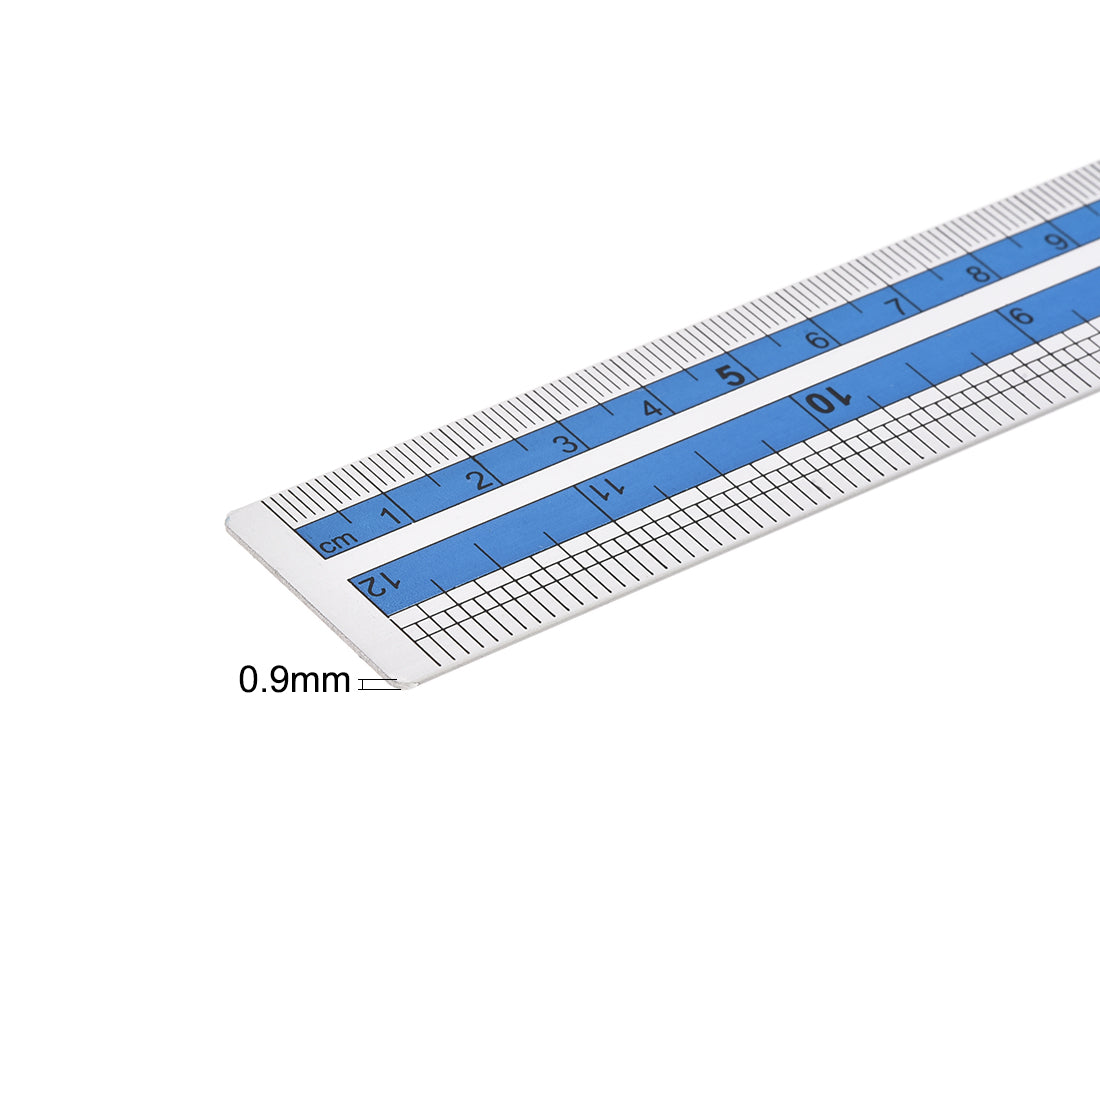 Uxcell Uxcell Aluminum Ruler Set 300mm 12 Inch Straight Ruler Measuring Tool Silver Blue